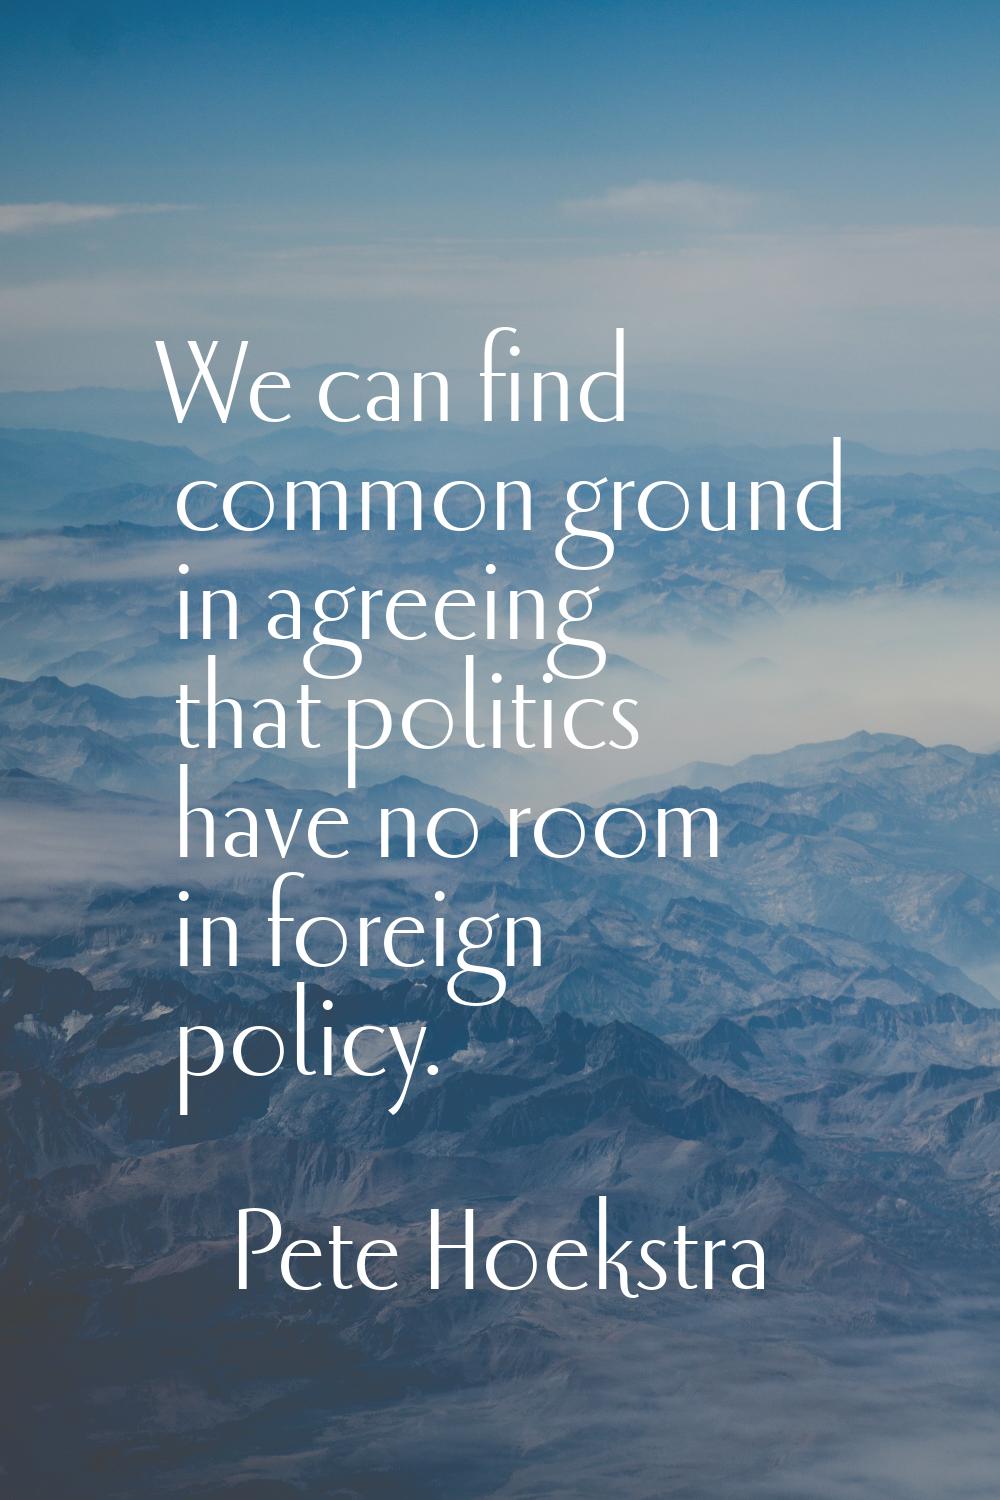 We can find common ground in agreeing that politics have no room in foreign policy.